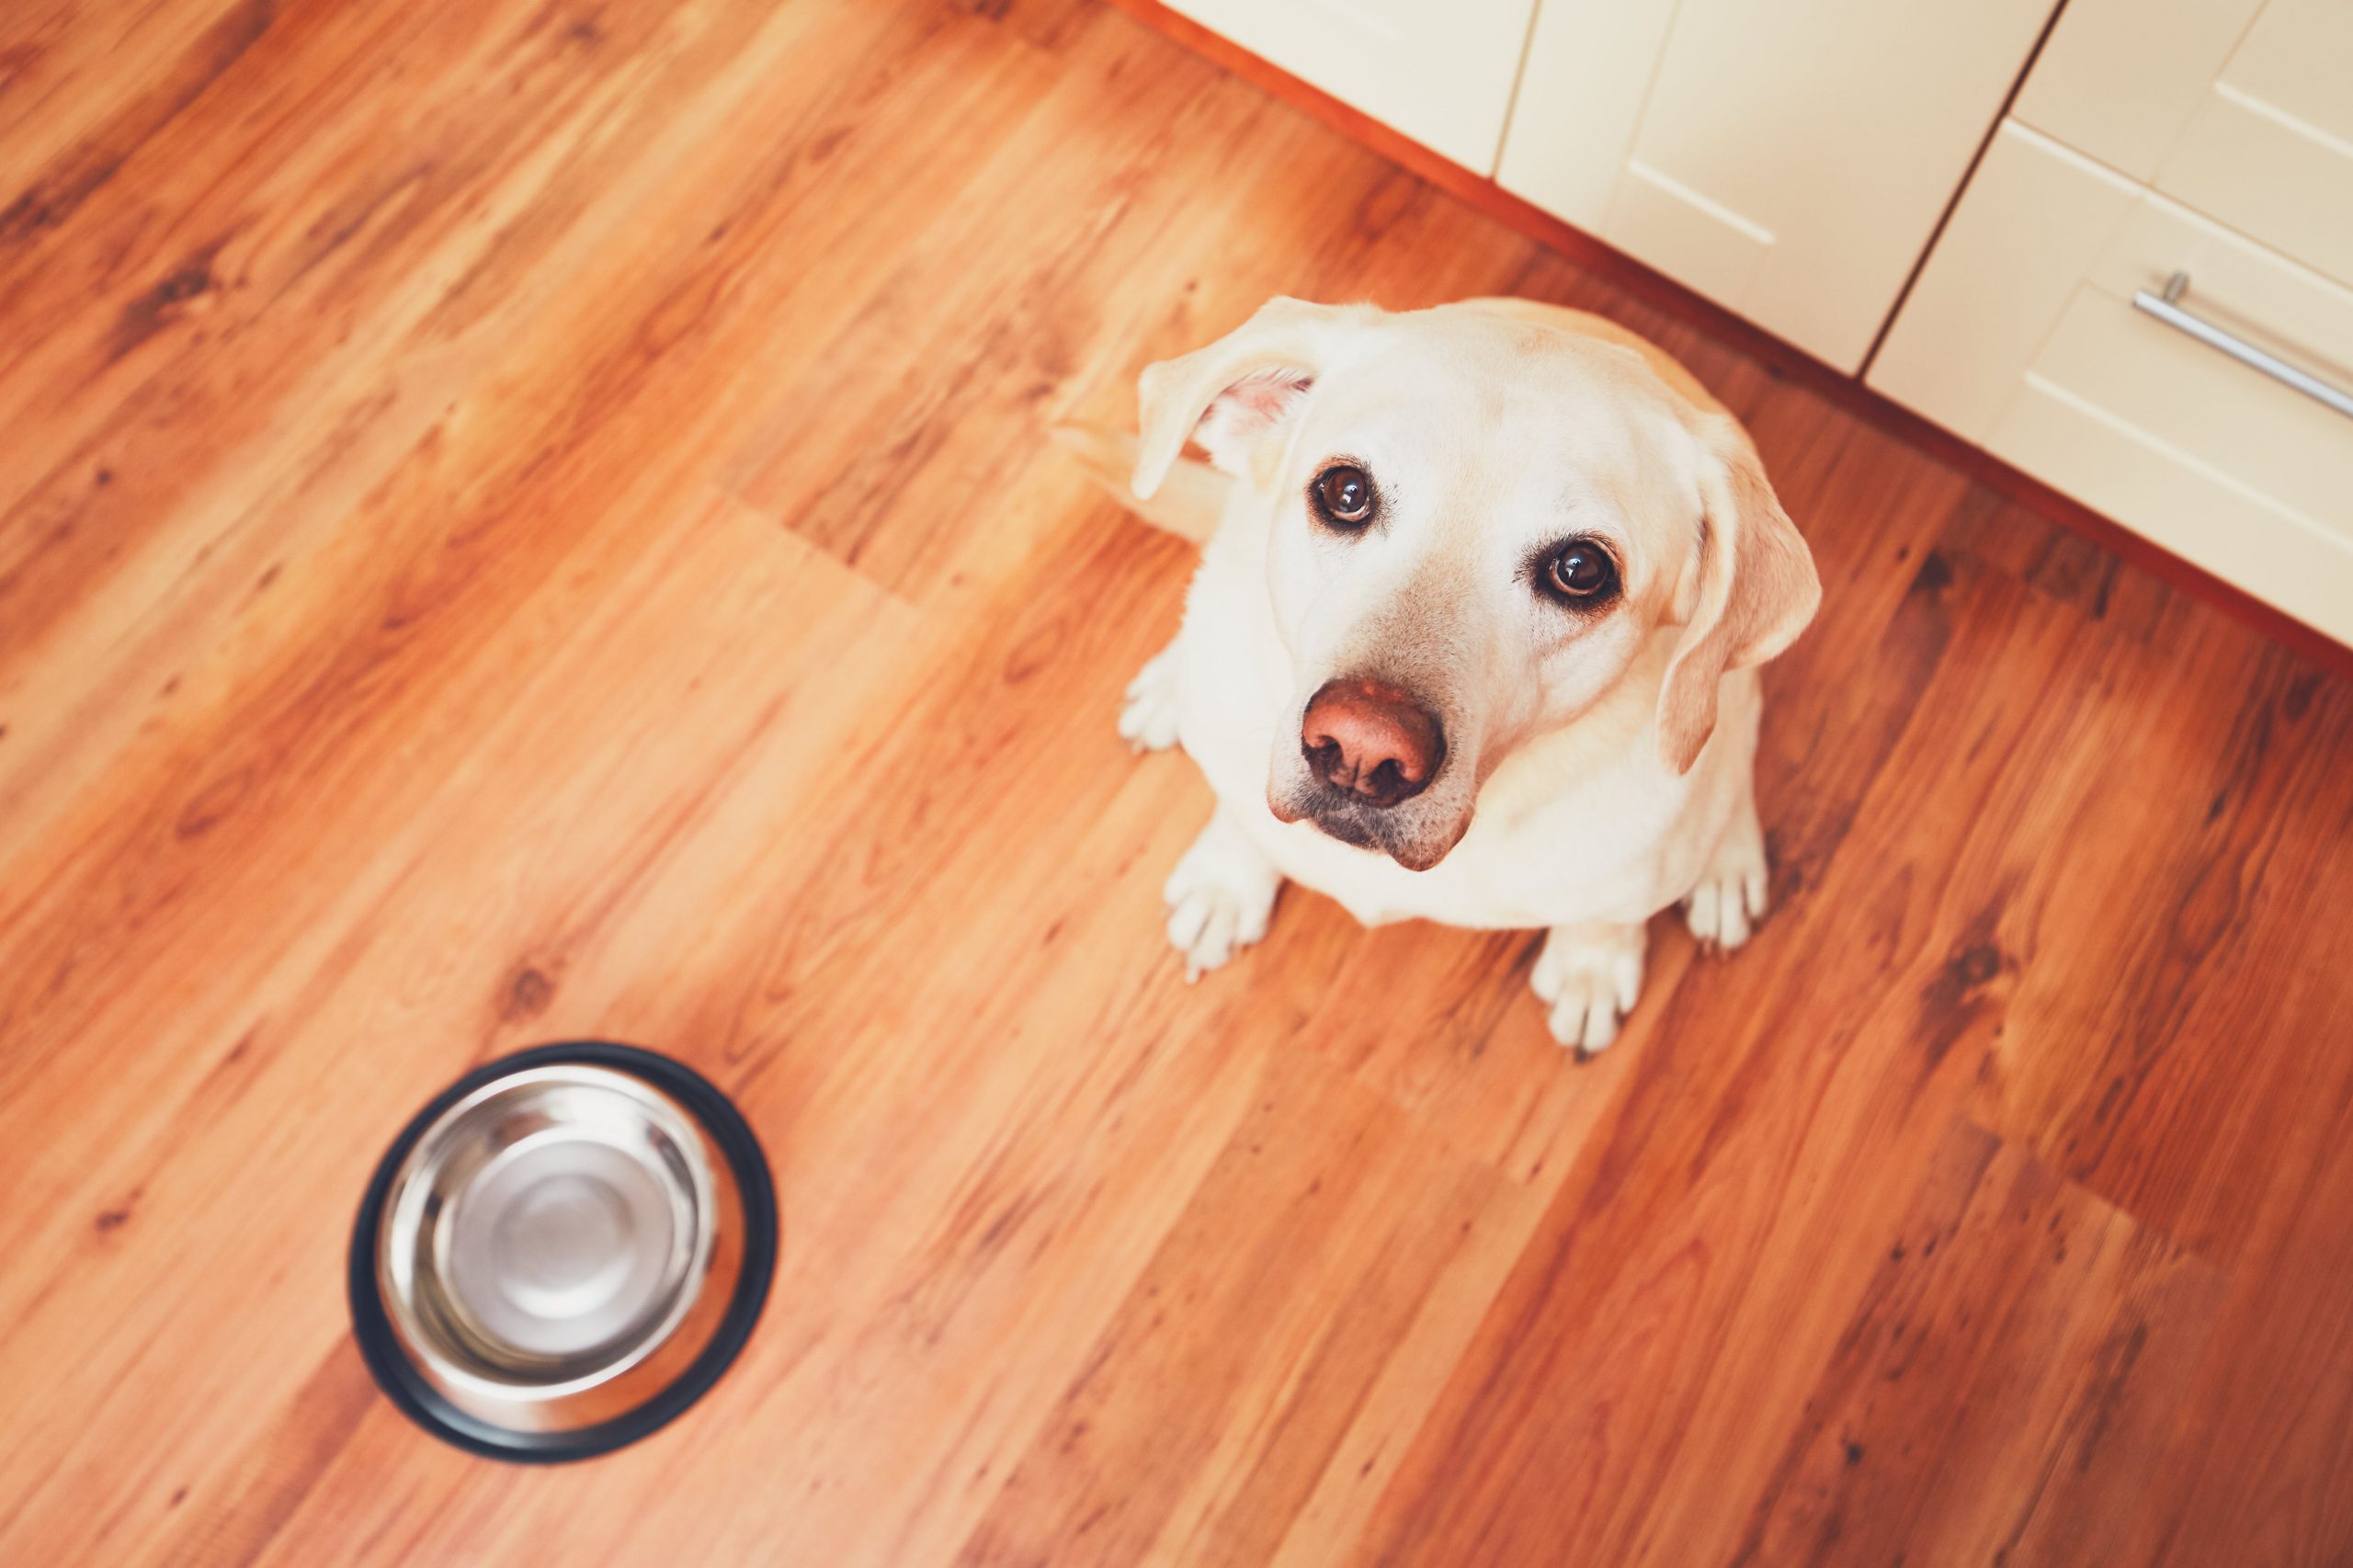 Innovation in the pet food industry – E-commerce for dogs